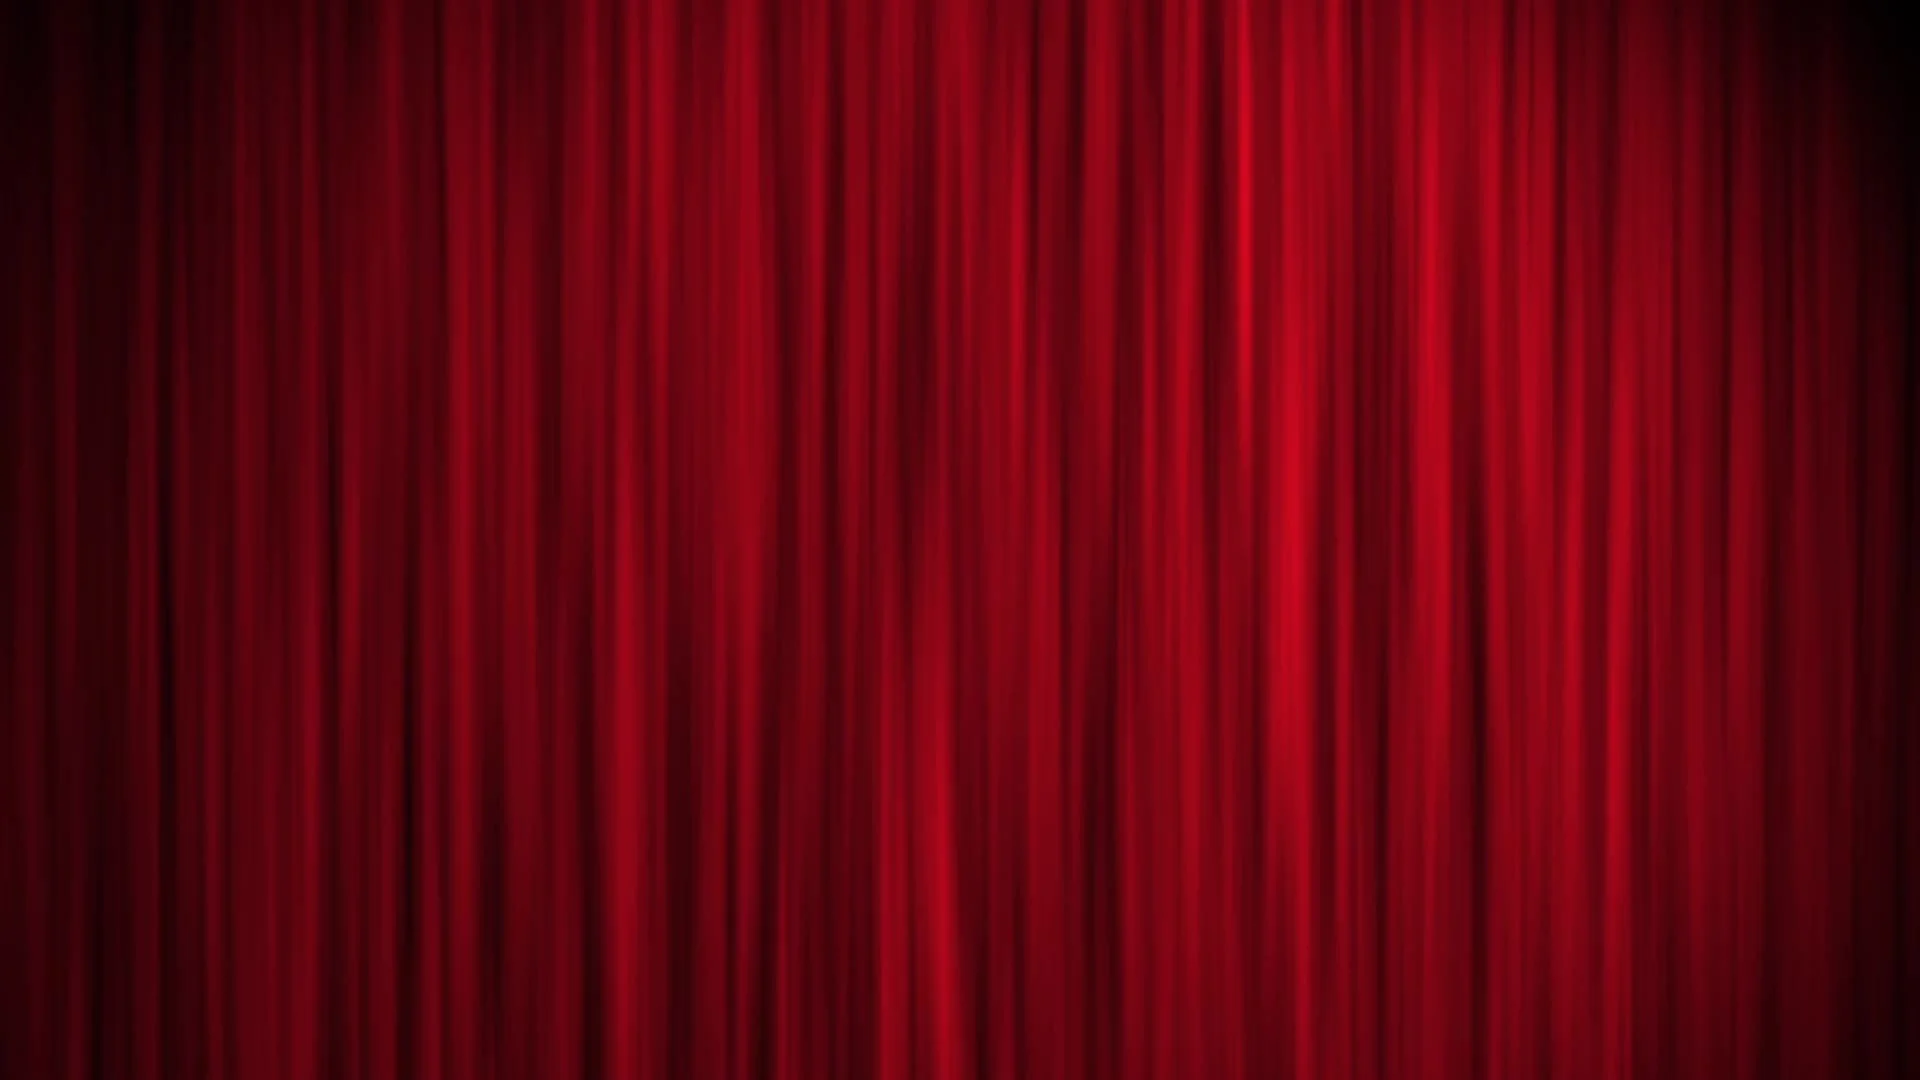 Red curtain animation background | Stock Video | Pond5